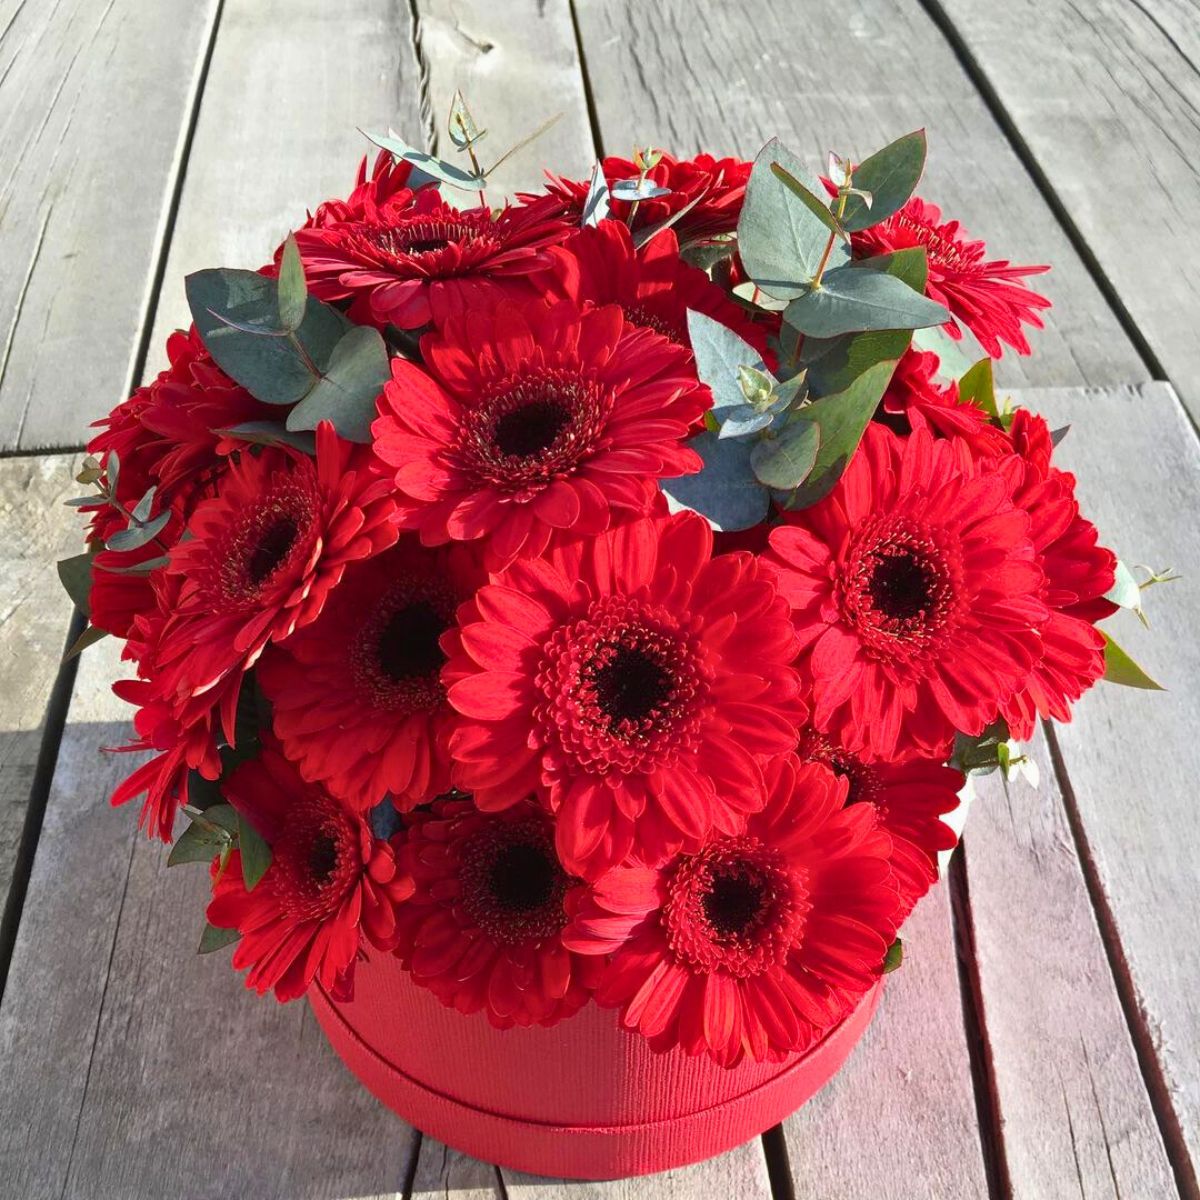 Red gerberas for Vday